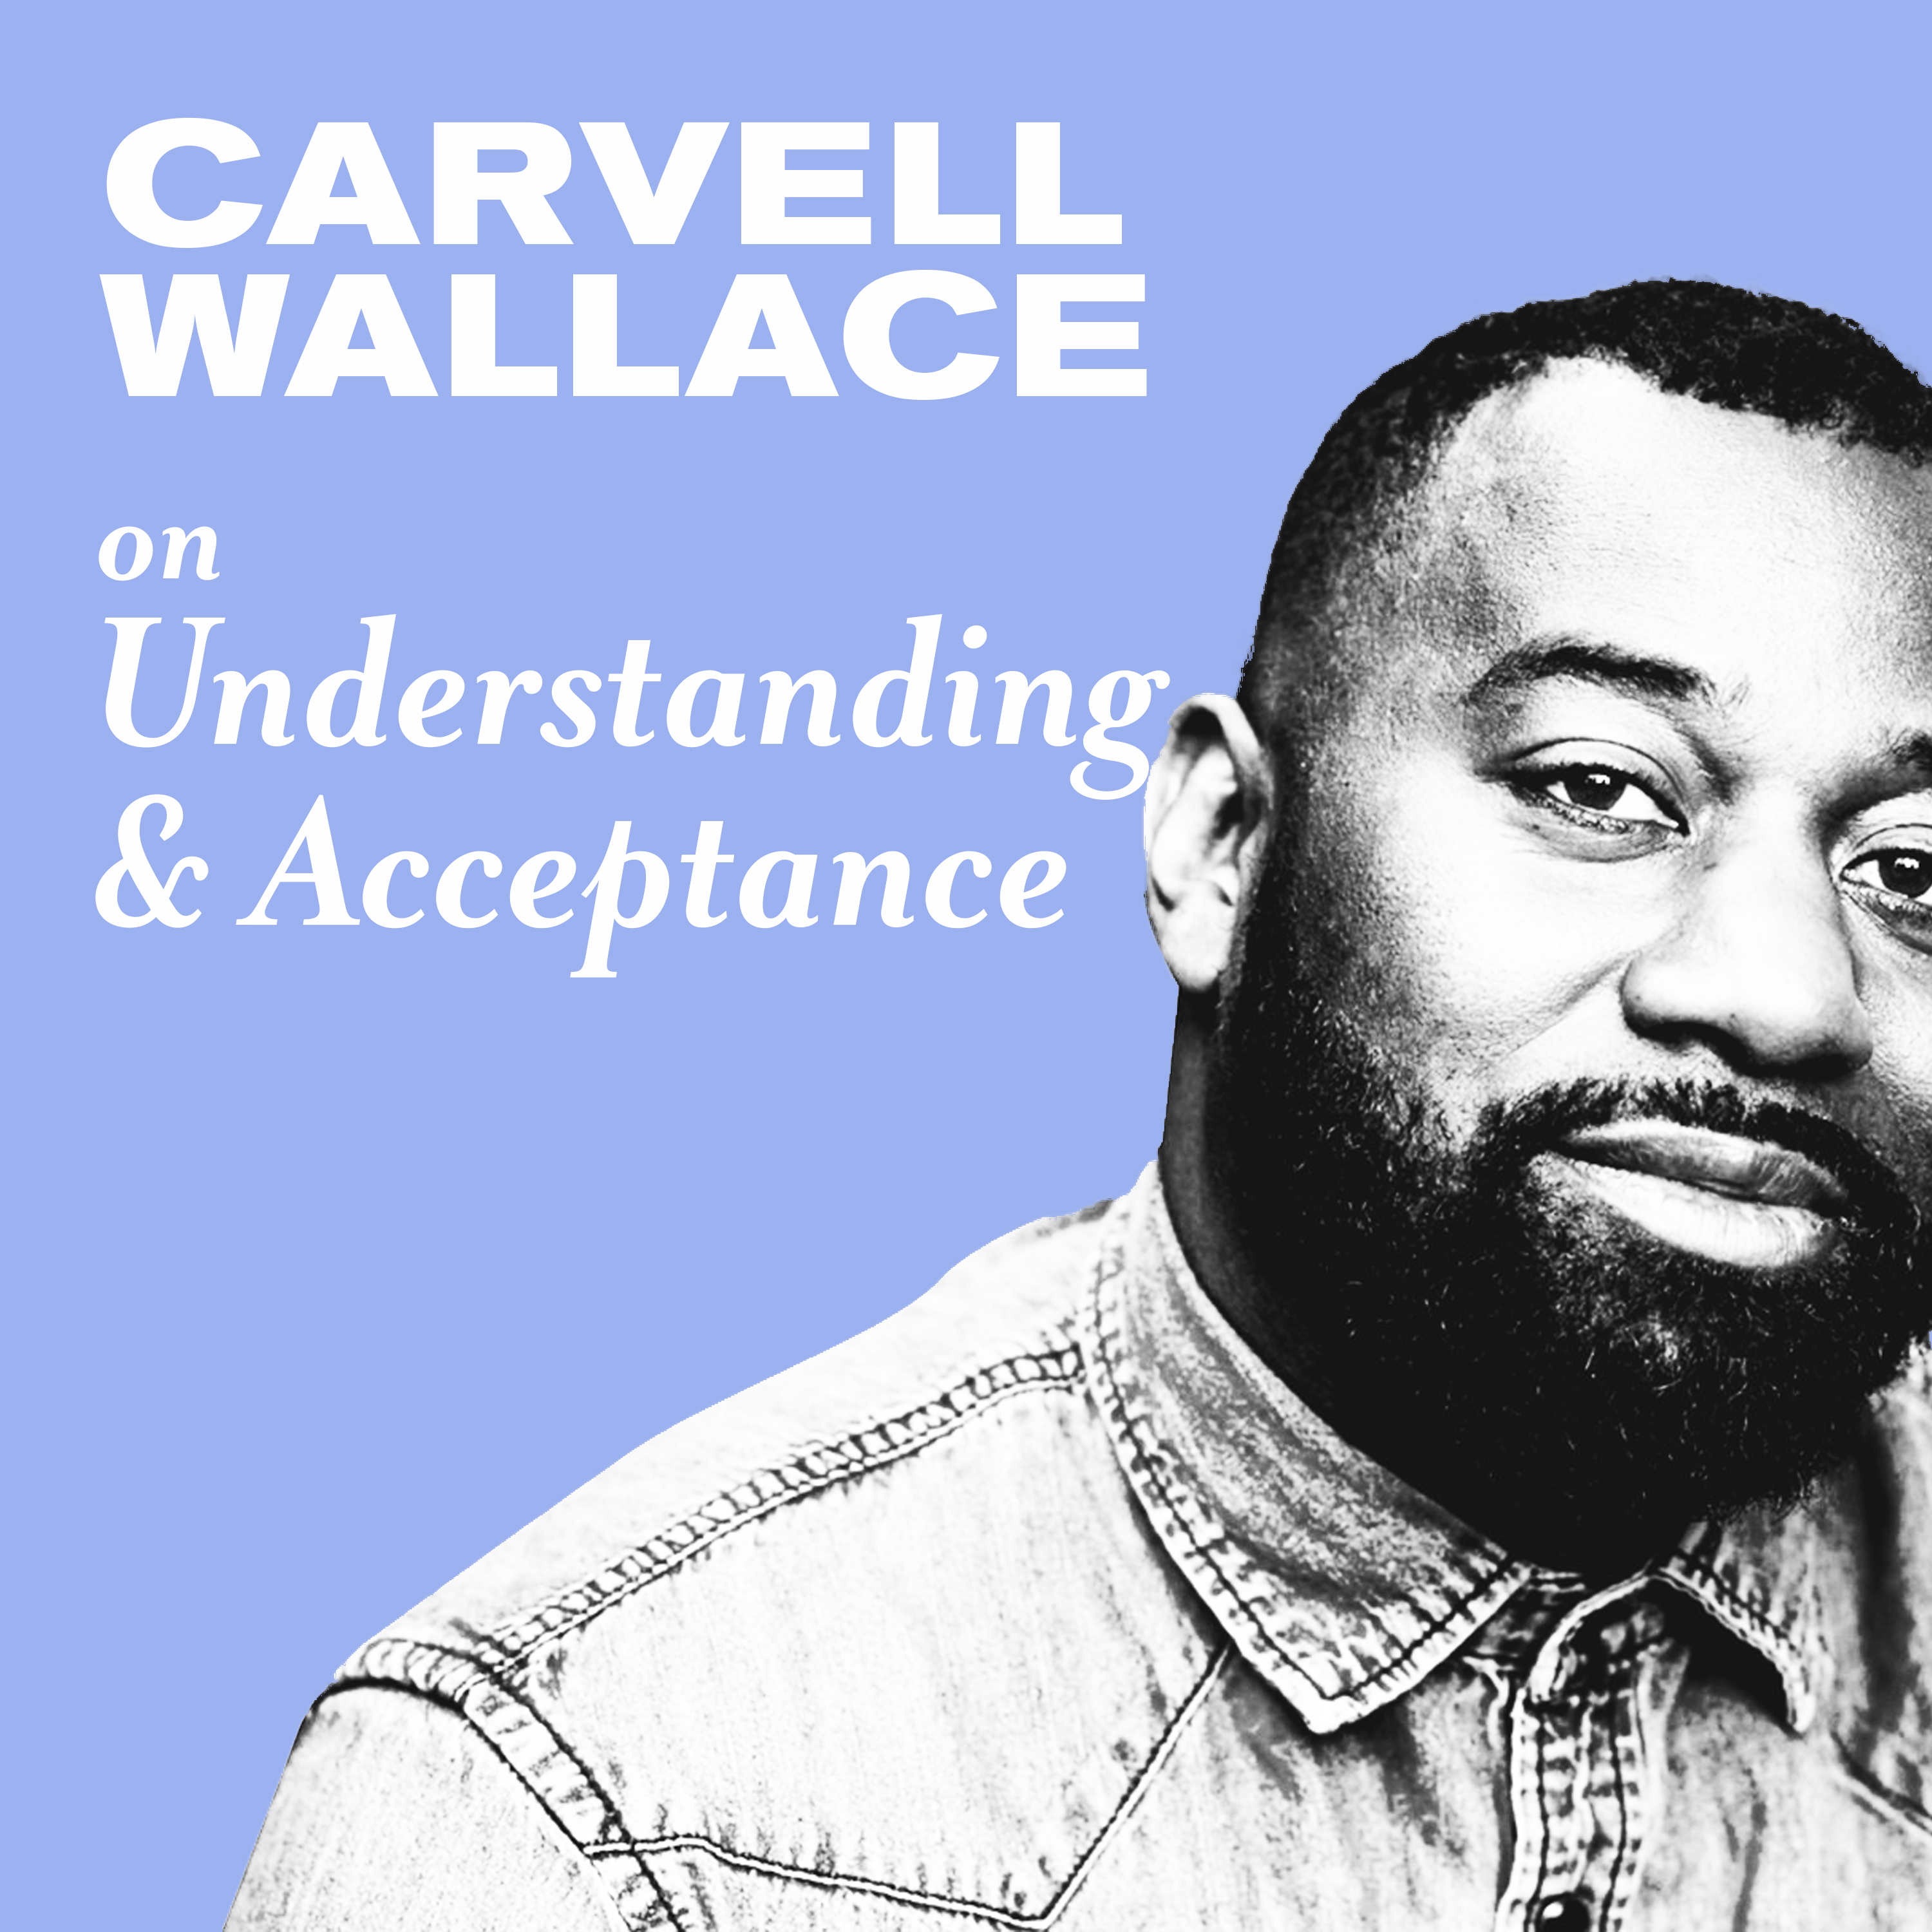 Carvell Wallace on Understanding and Acceptance